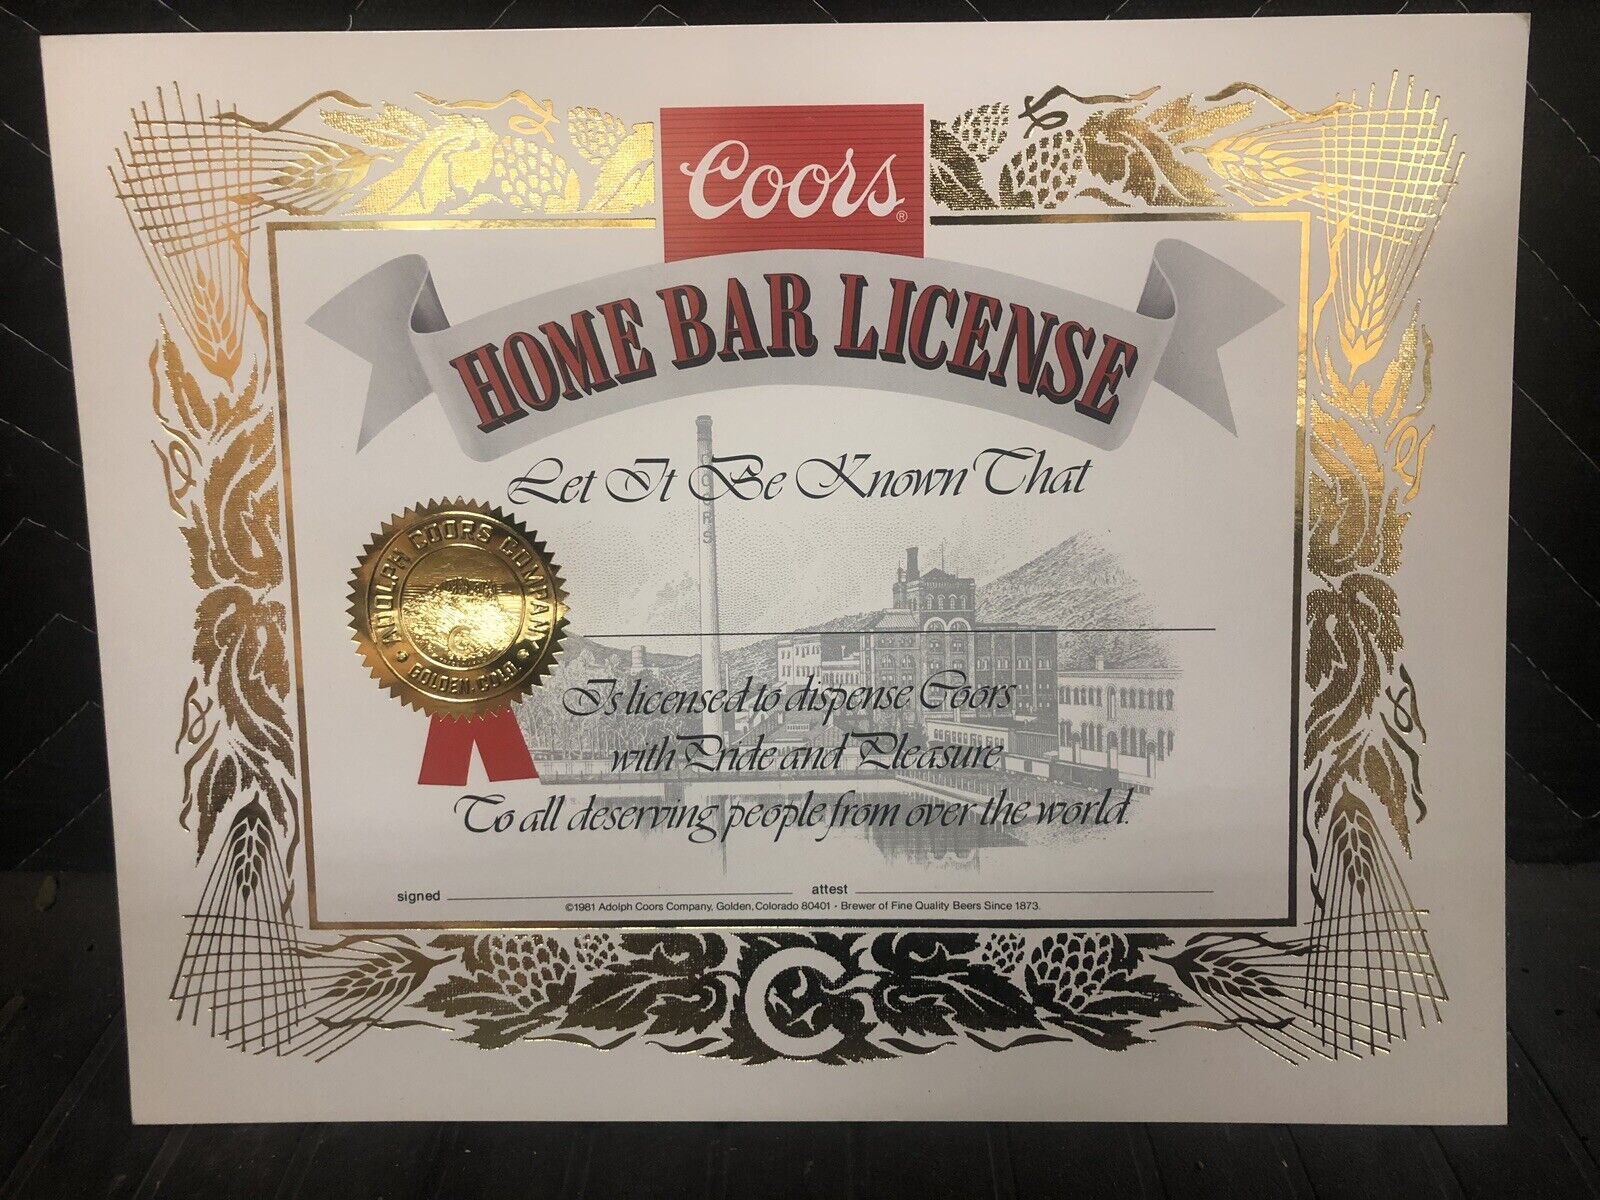 RARE Vintage 1981 OFFICIAL COORS HOME BAR LICENSE GOLD EMBOSSED SEAL GOLD BORDER